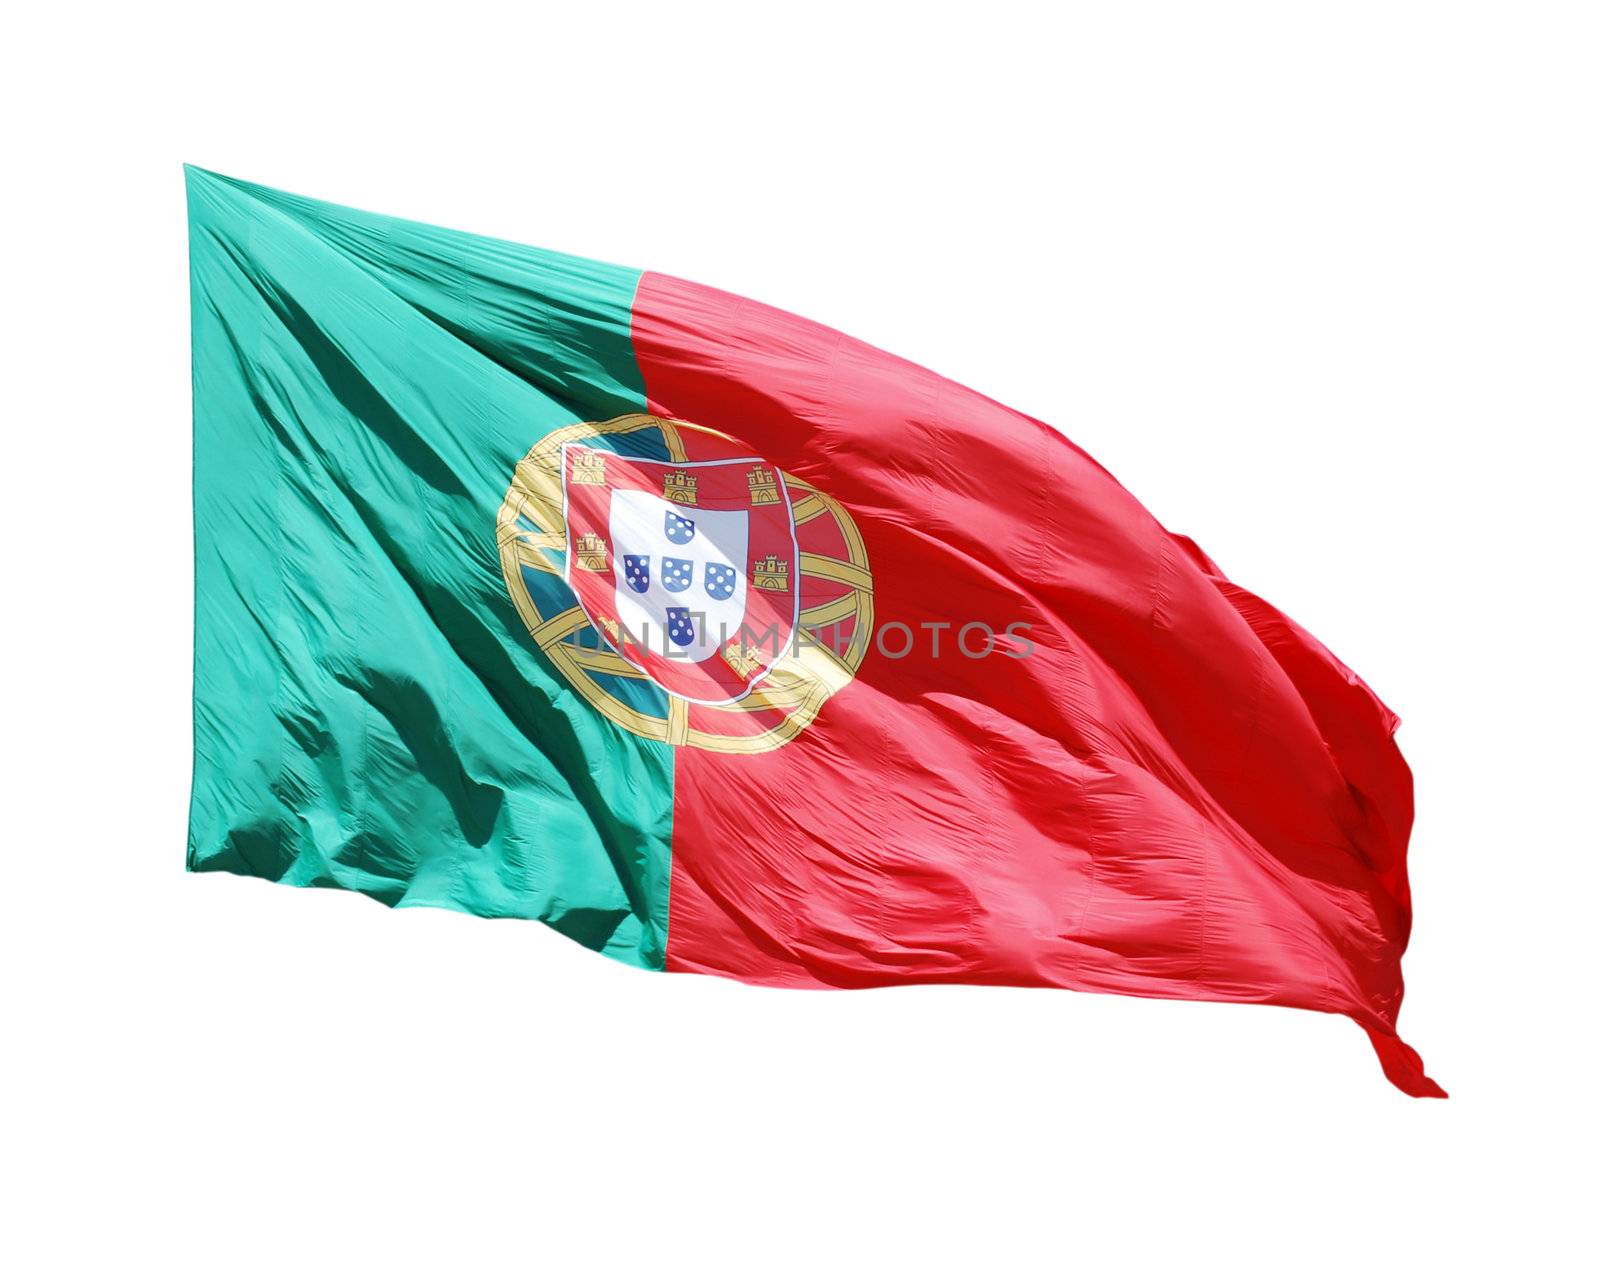 Portugal flag by luissantos84